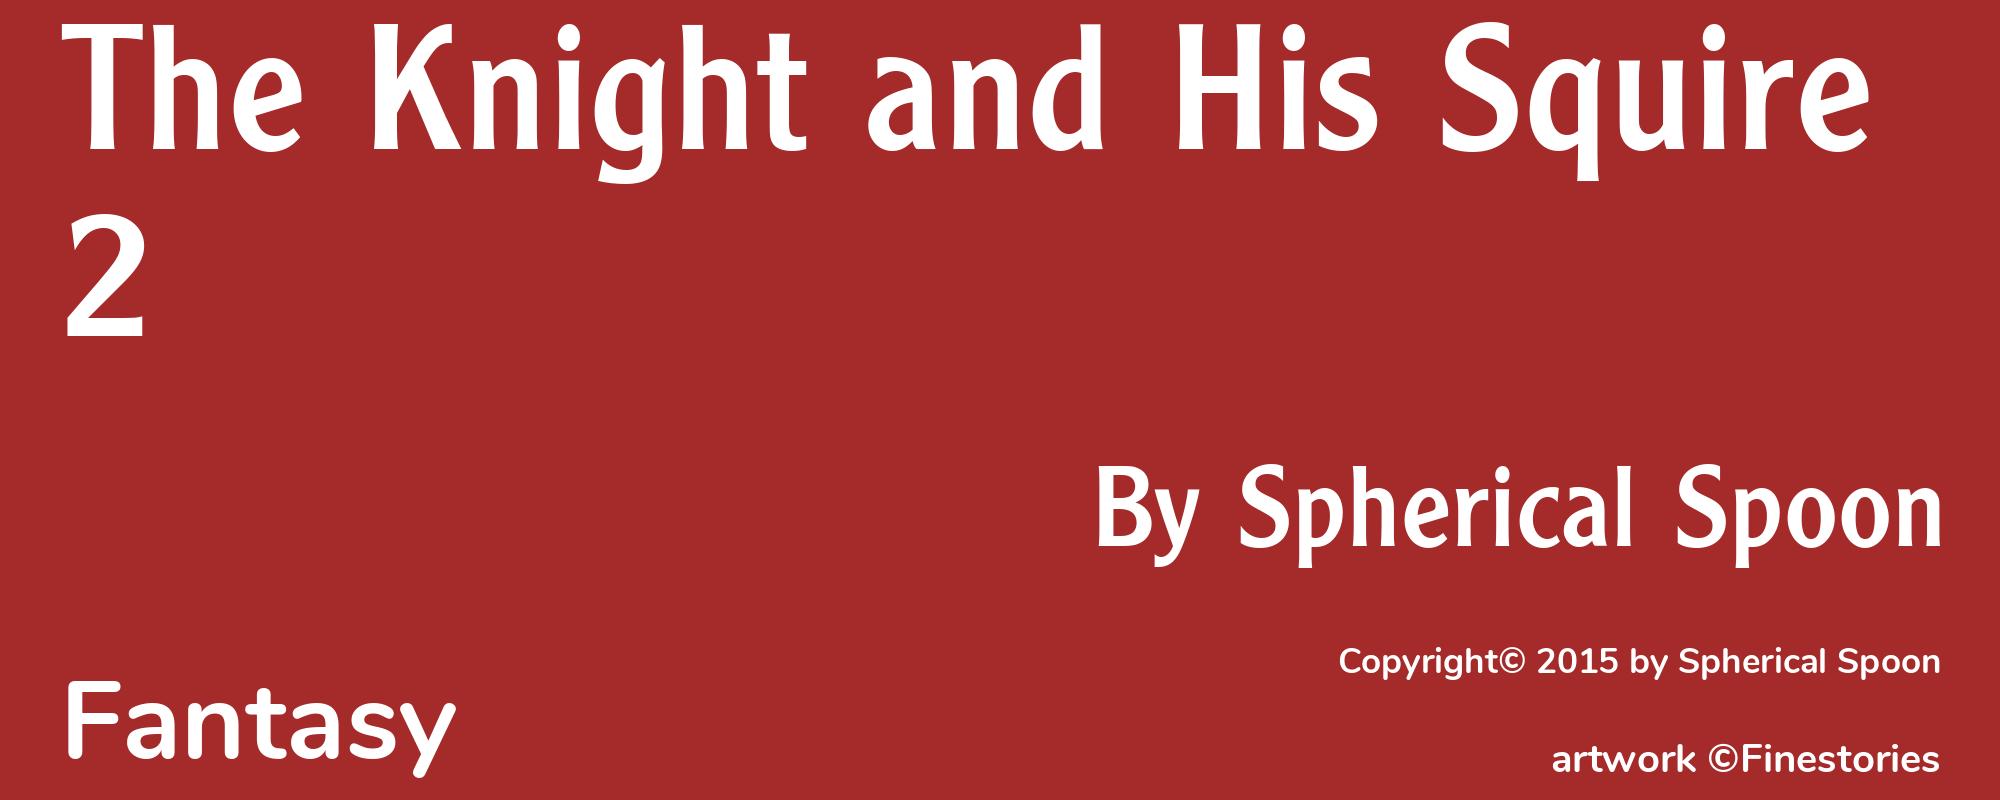 The Knight and His Squire 2 - Cover